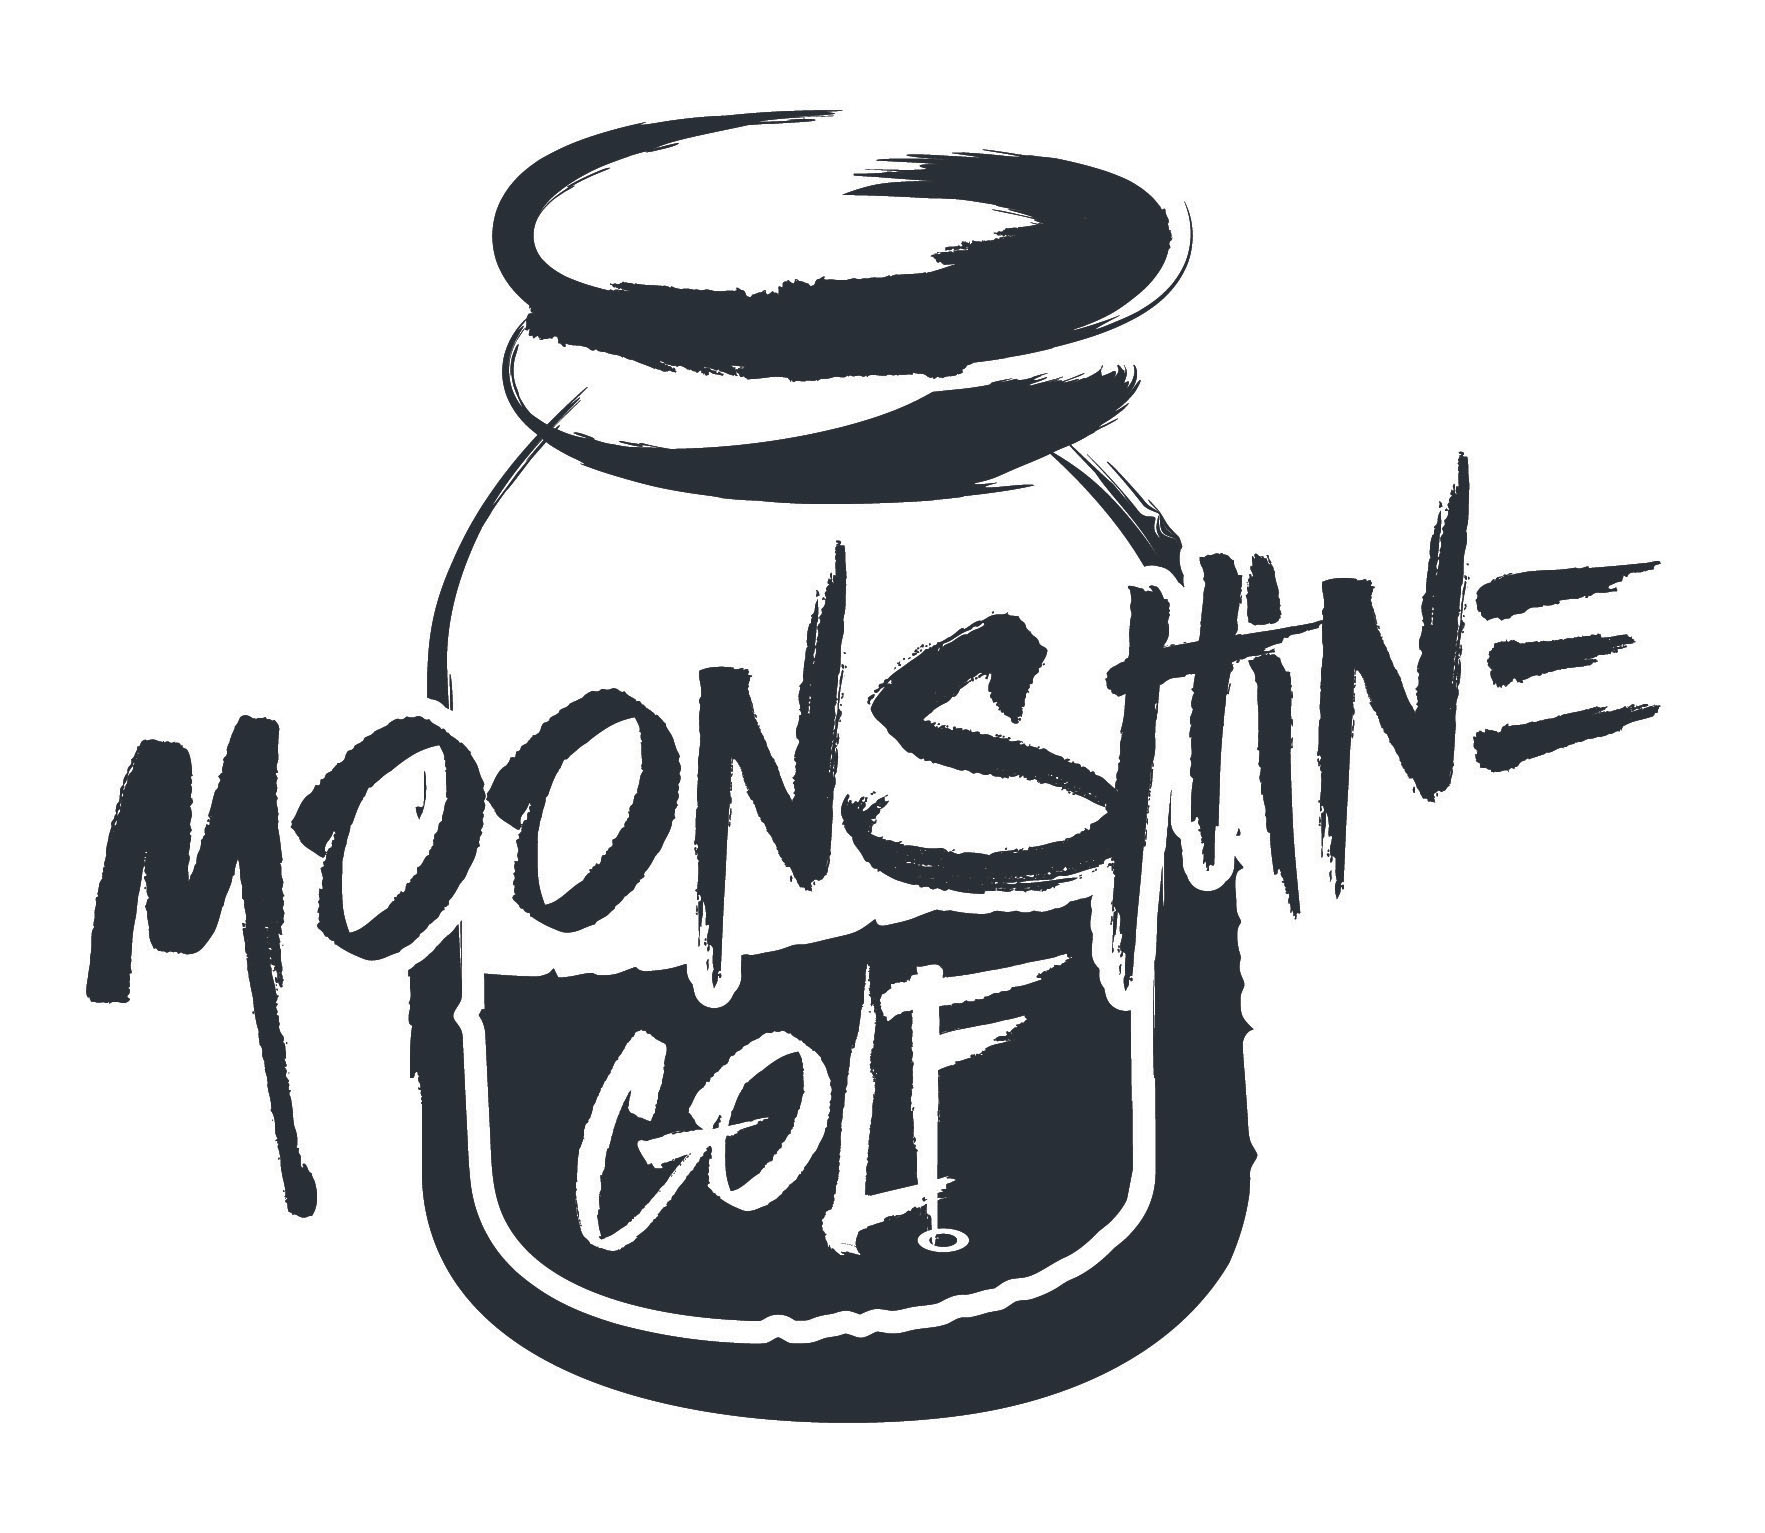 Jameson Rodgers teams up with Moonshine Golf, Bringing Laid-Back Country Style to the Course and Beyond